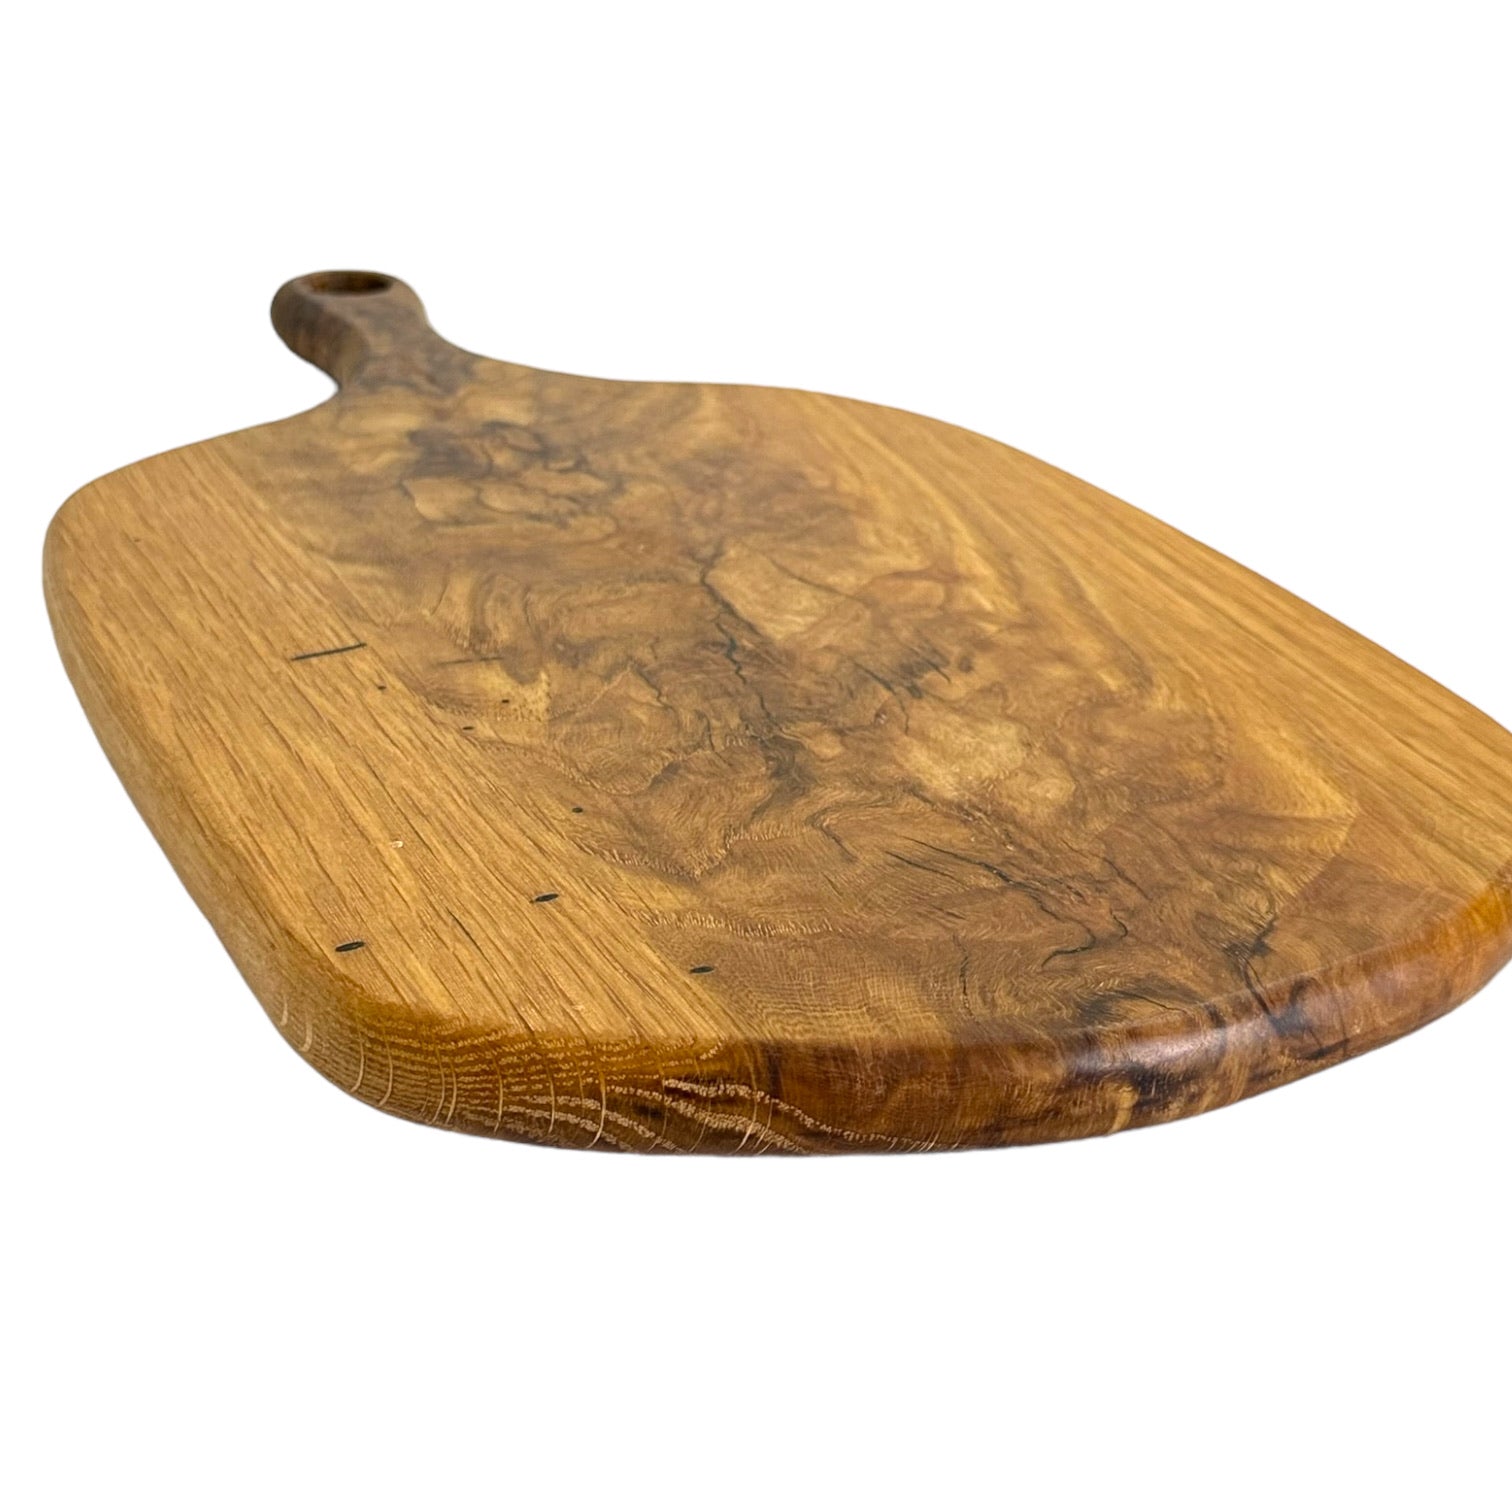 Rustic Oak - Handmade Wooden Charcuterie Boards - RTS style 1 bottom edge detail view